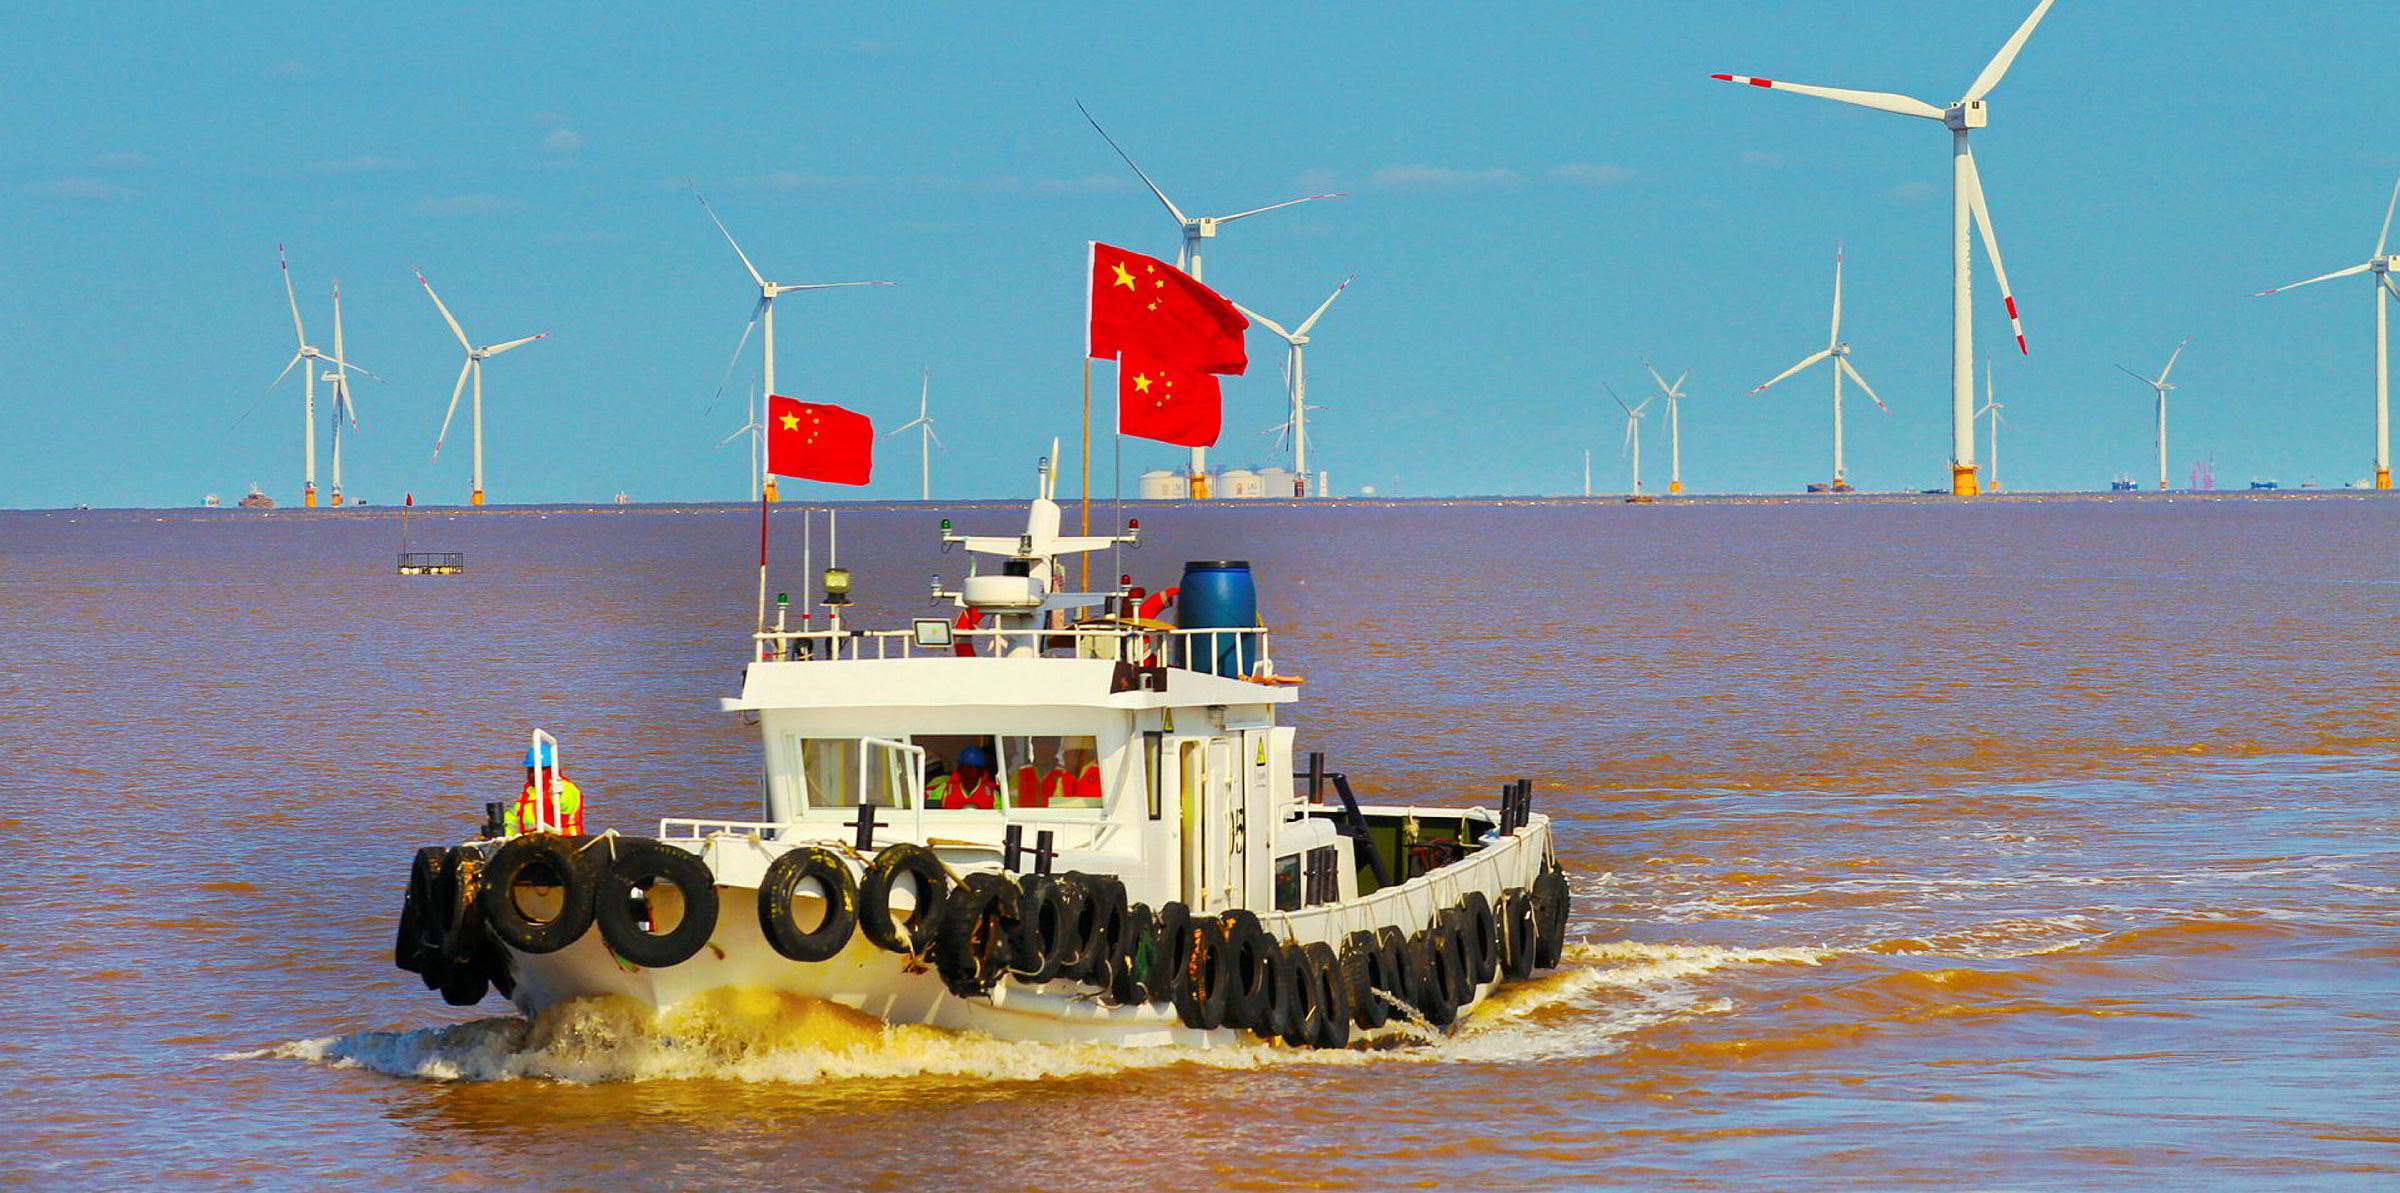 China's Ming Yang eyes 15MW offshore wind turbine after $850m